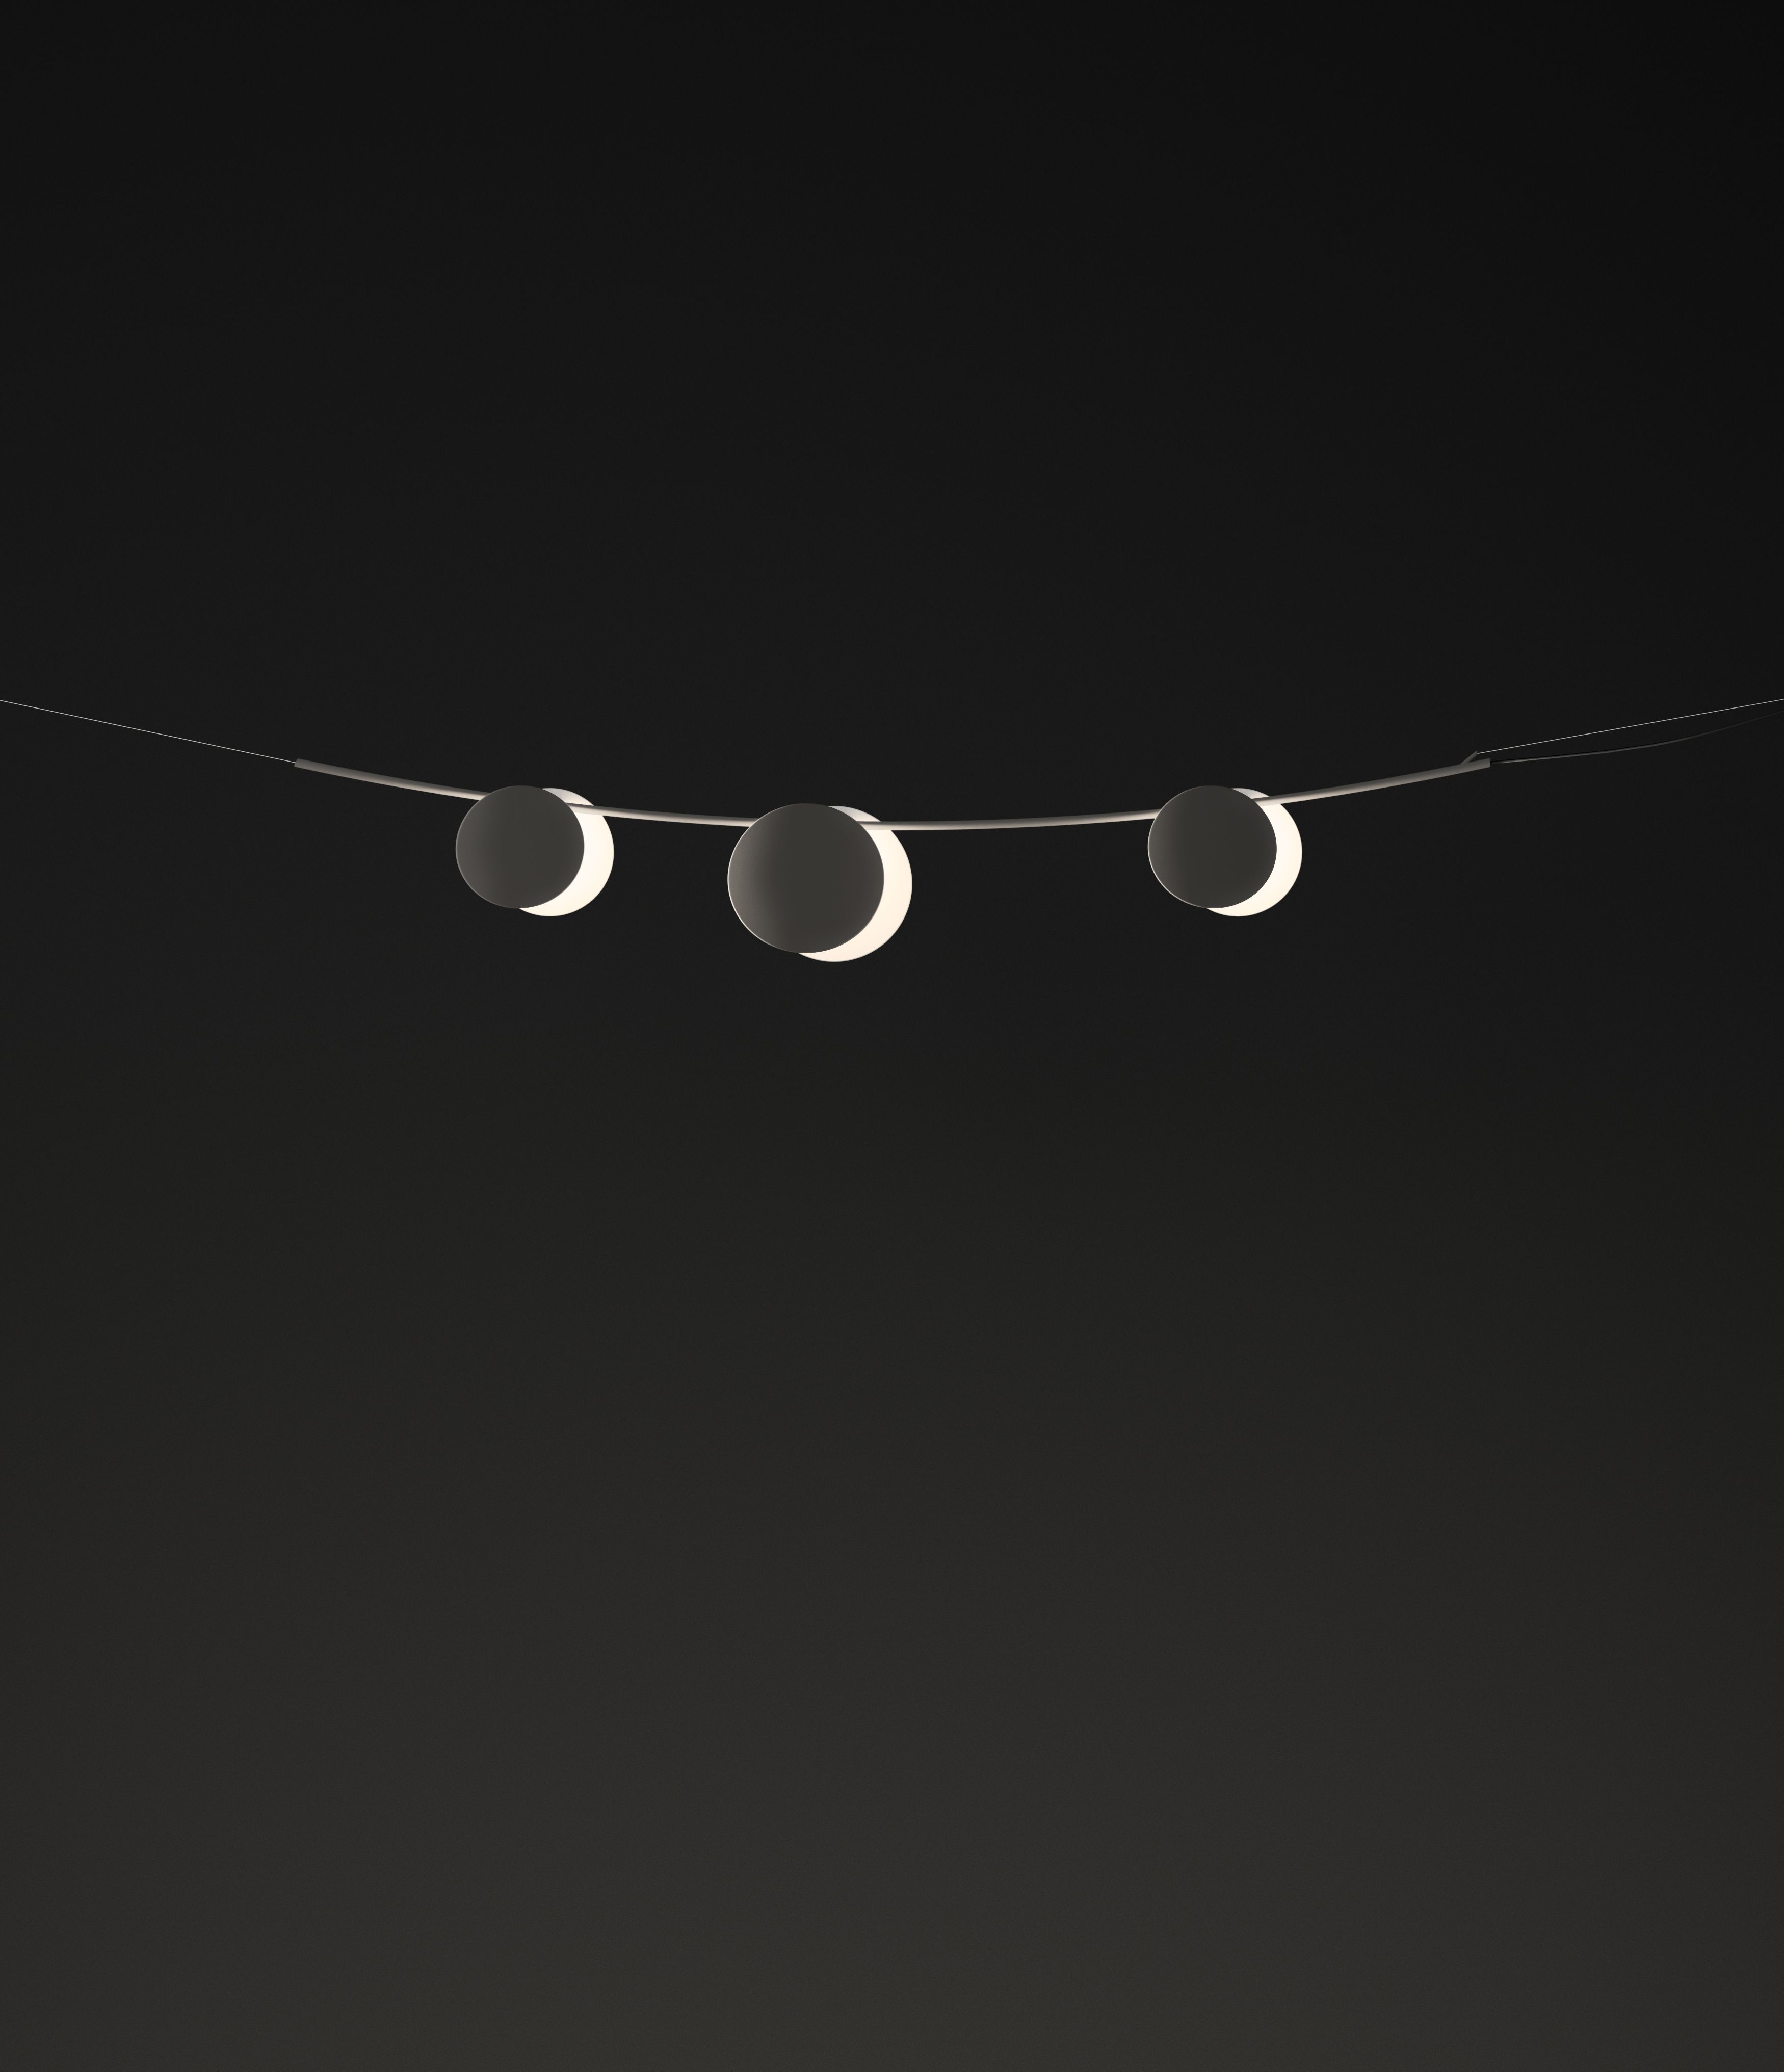 Hanging lamp June by Vibia